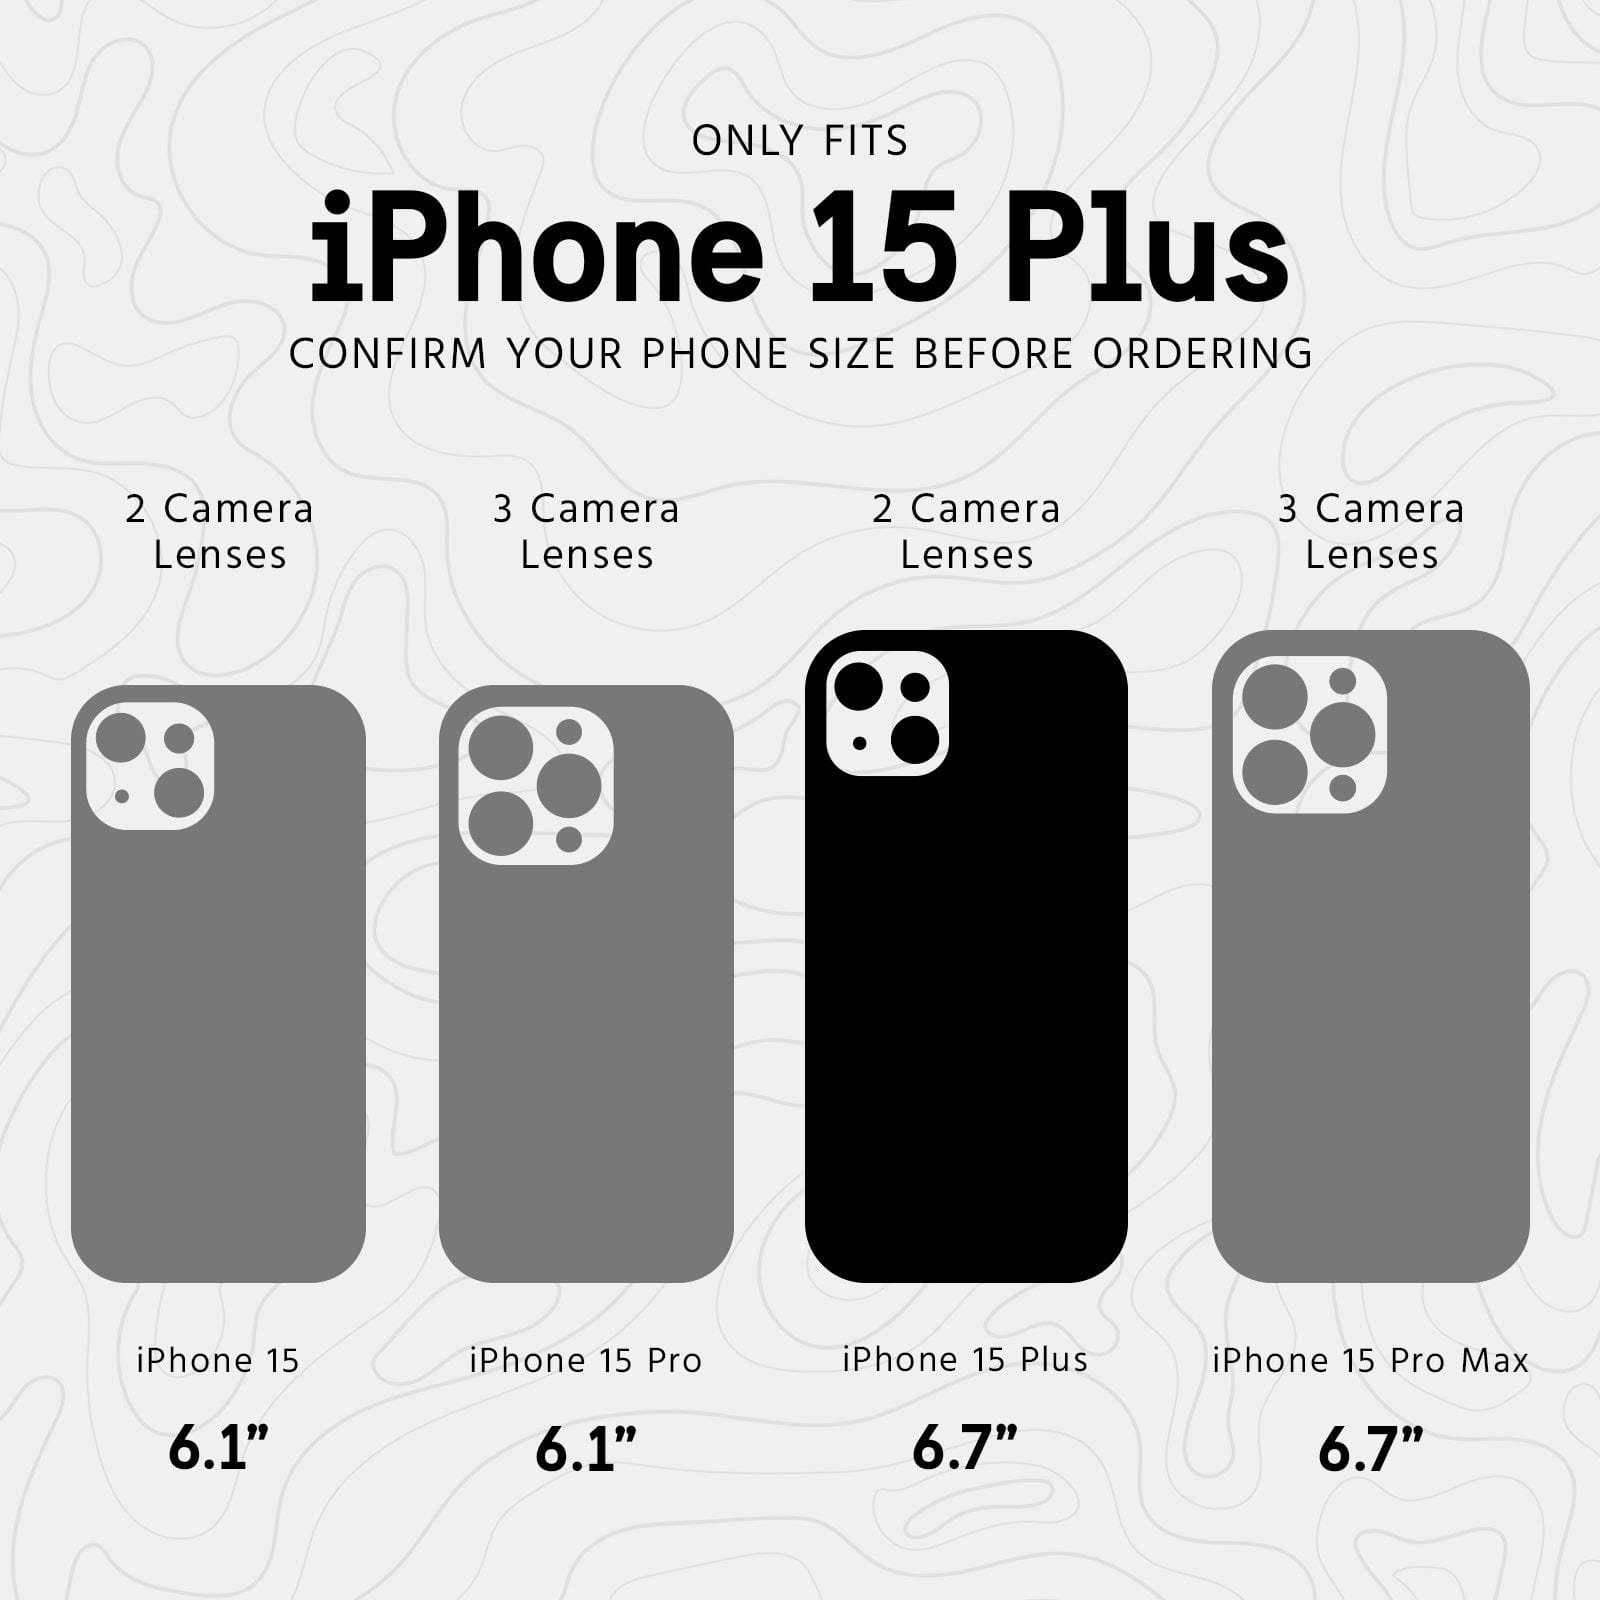 ONLY FITS IPHONE 15 PLUS. CONFIRM YOUR DEVICE BEFORE ORDERING